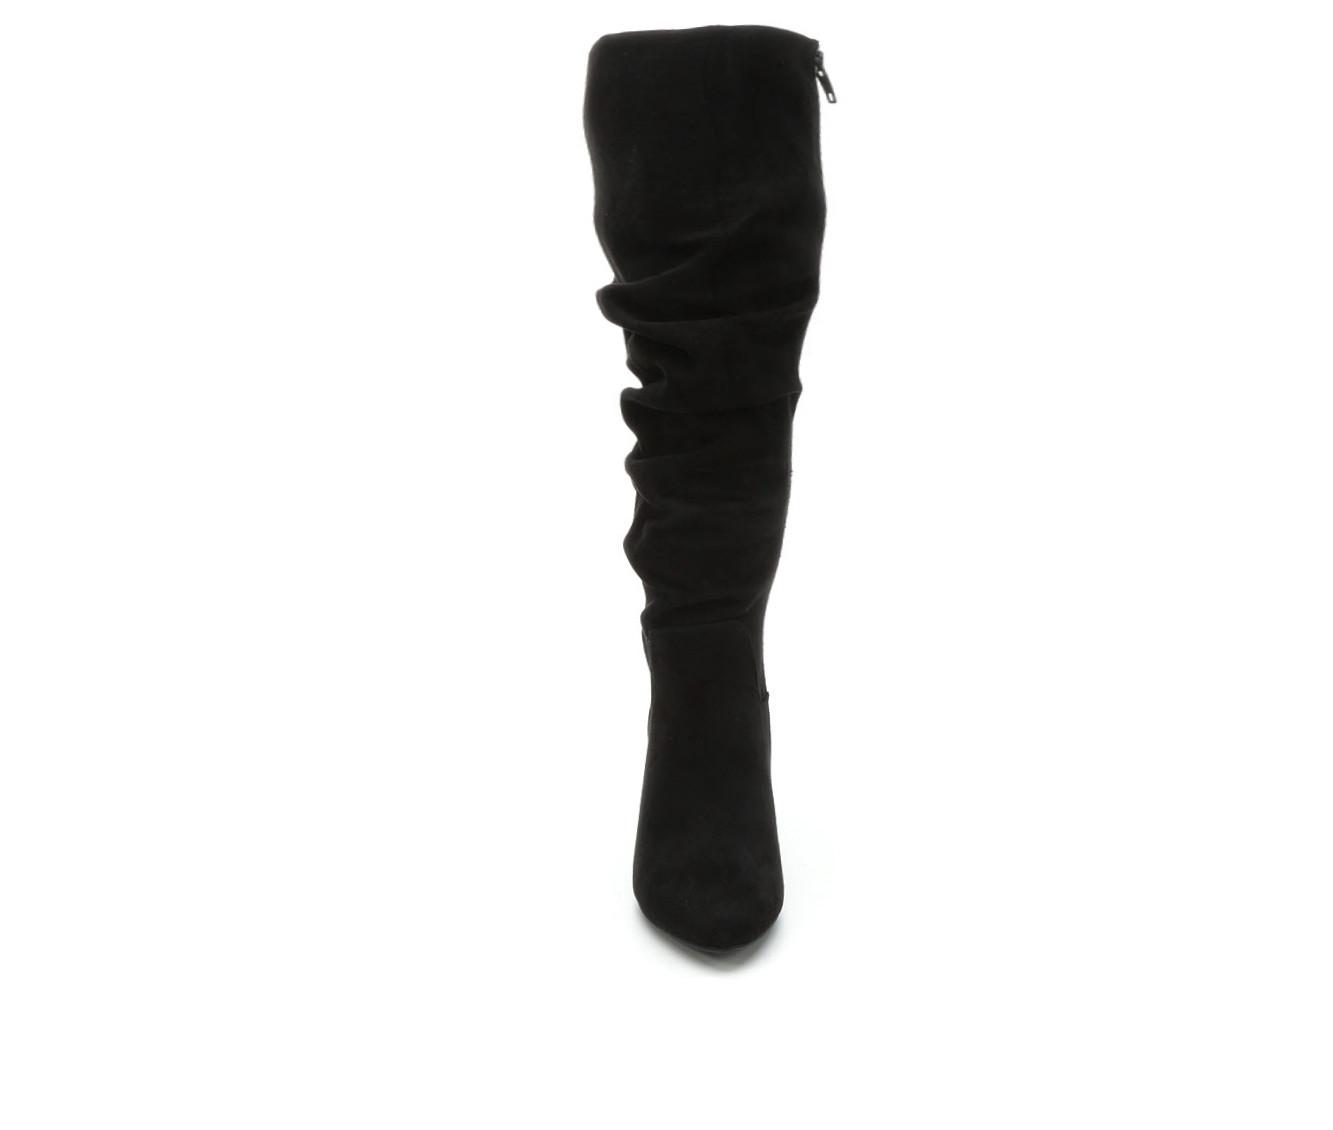 Women's Y-Not Compassion Wide Calf Knee High Boots